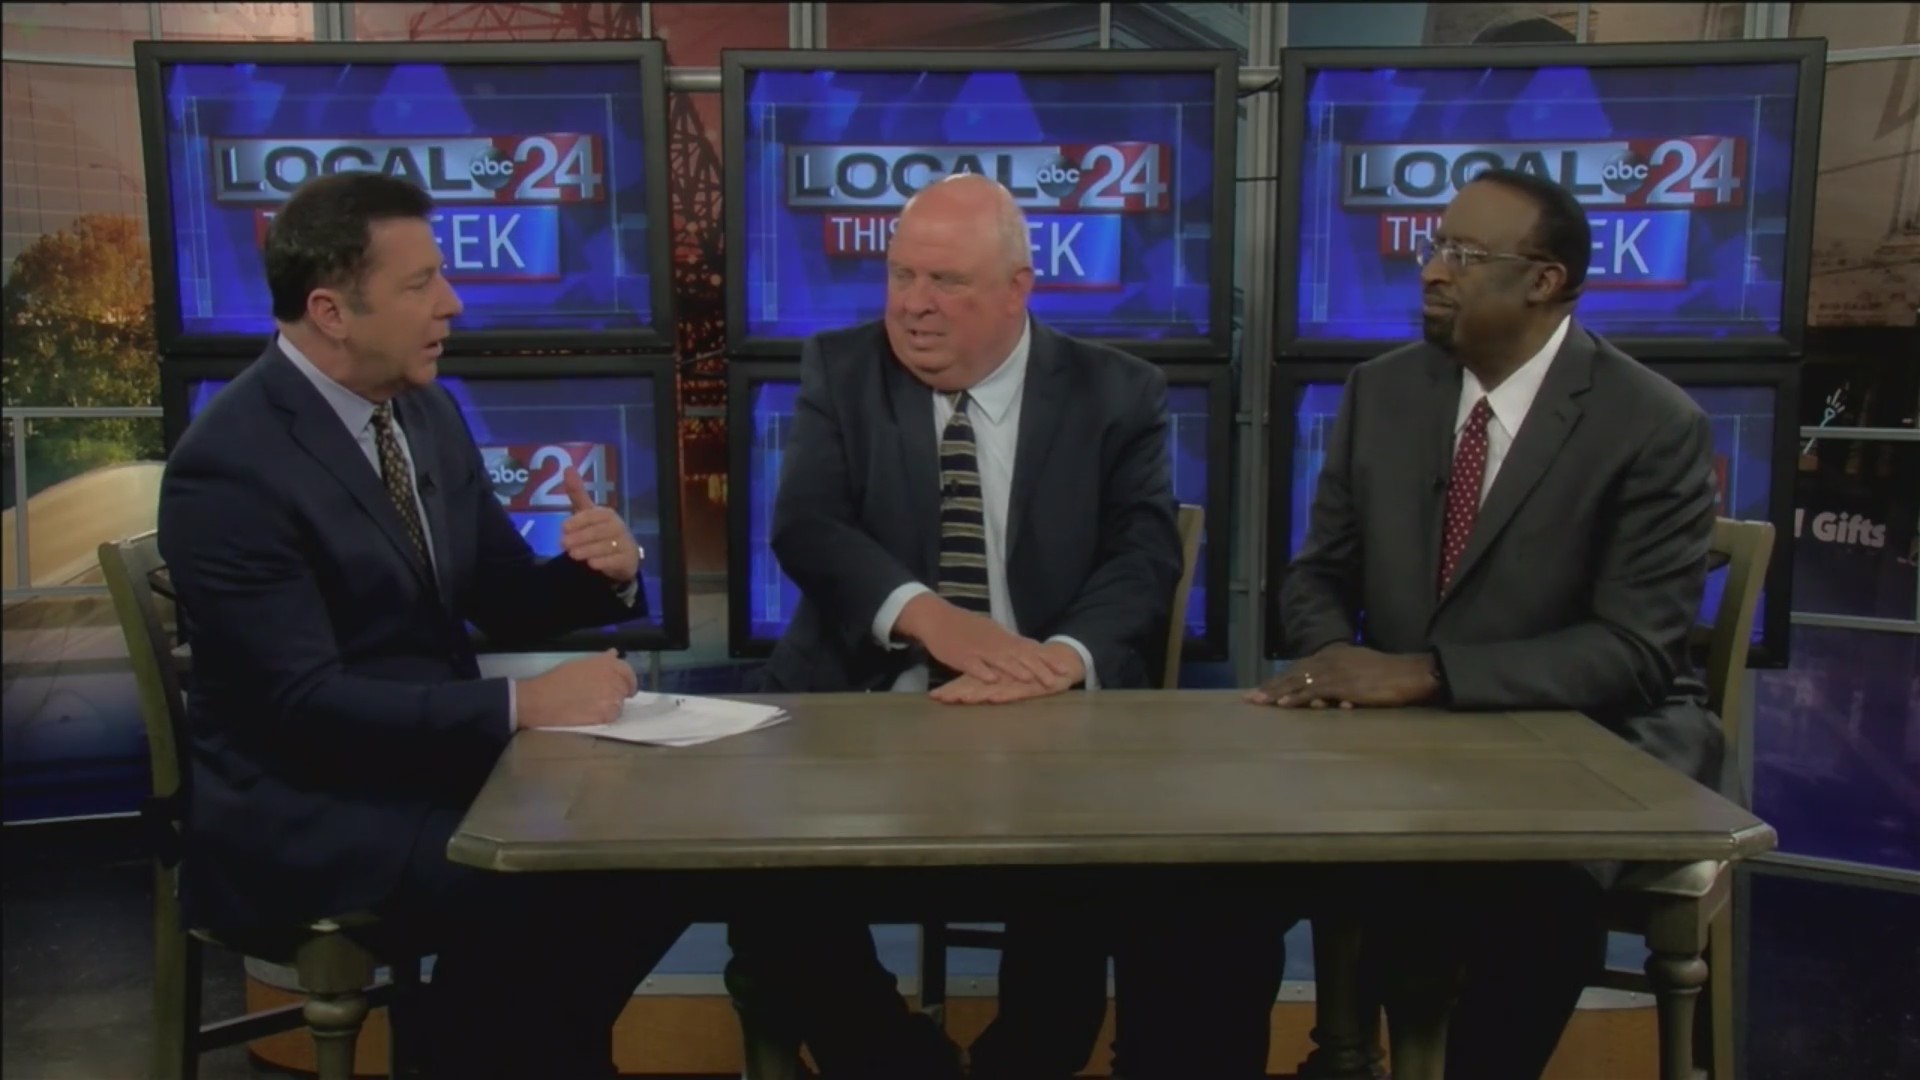 Local 24 This Week 02/23/2020